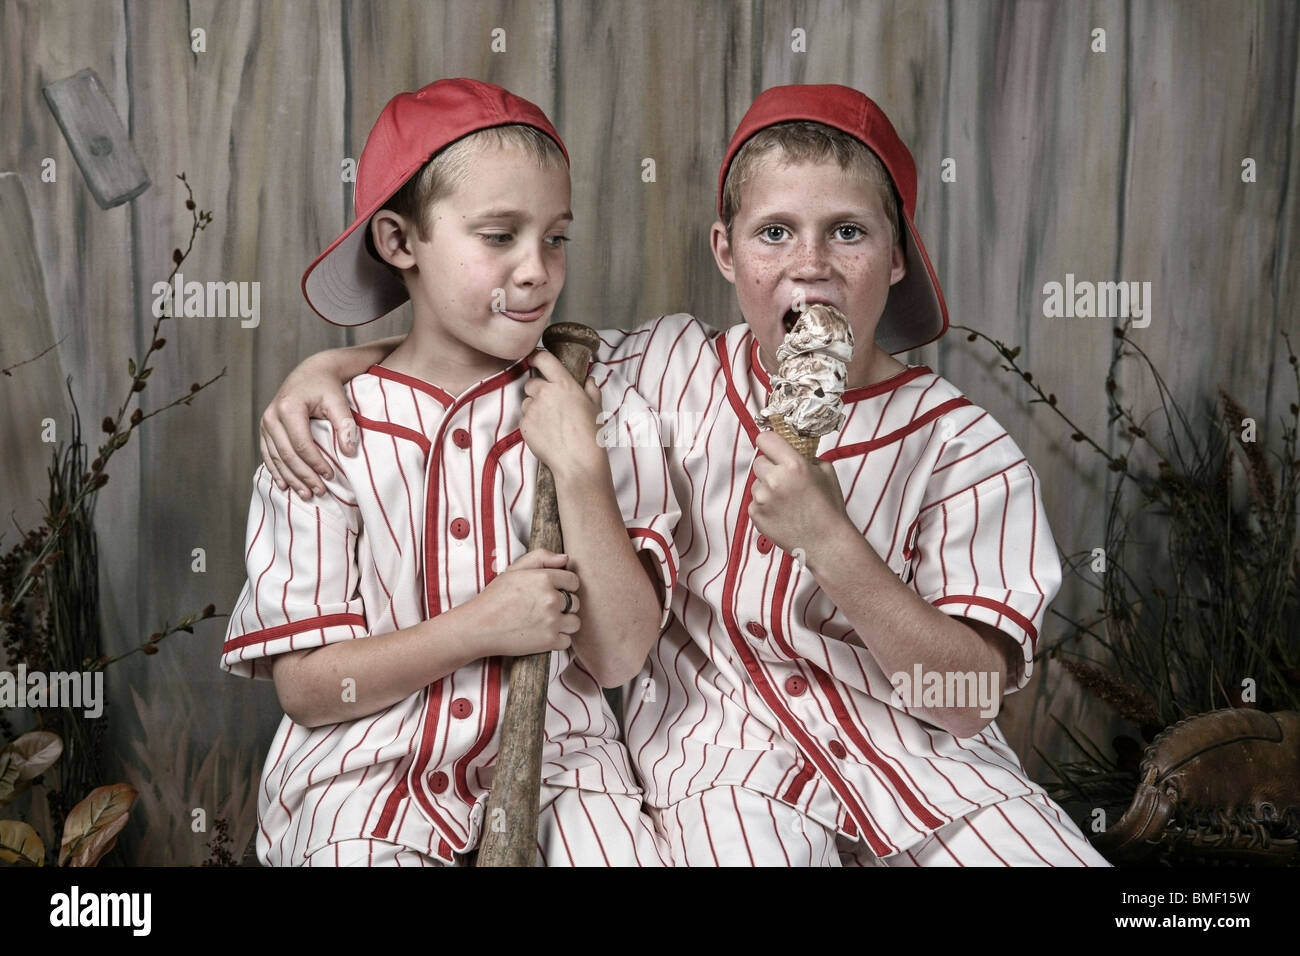 Two Boys Wearing Baseball Uniforms And One Is Eating An Ice Cream Cone  Stock Photo - Alamy